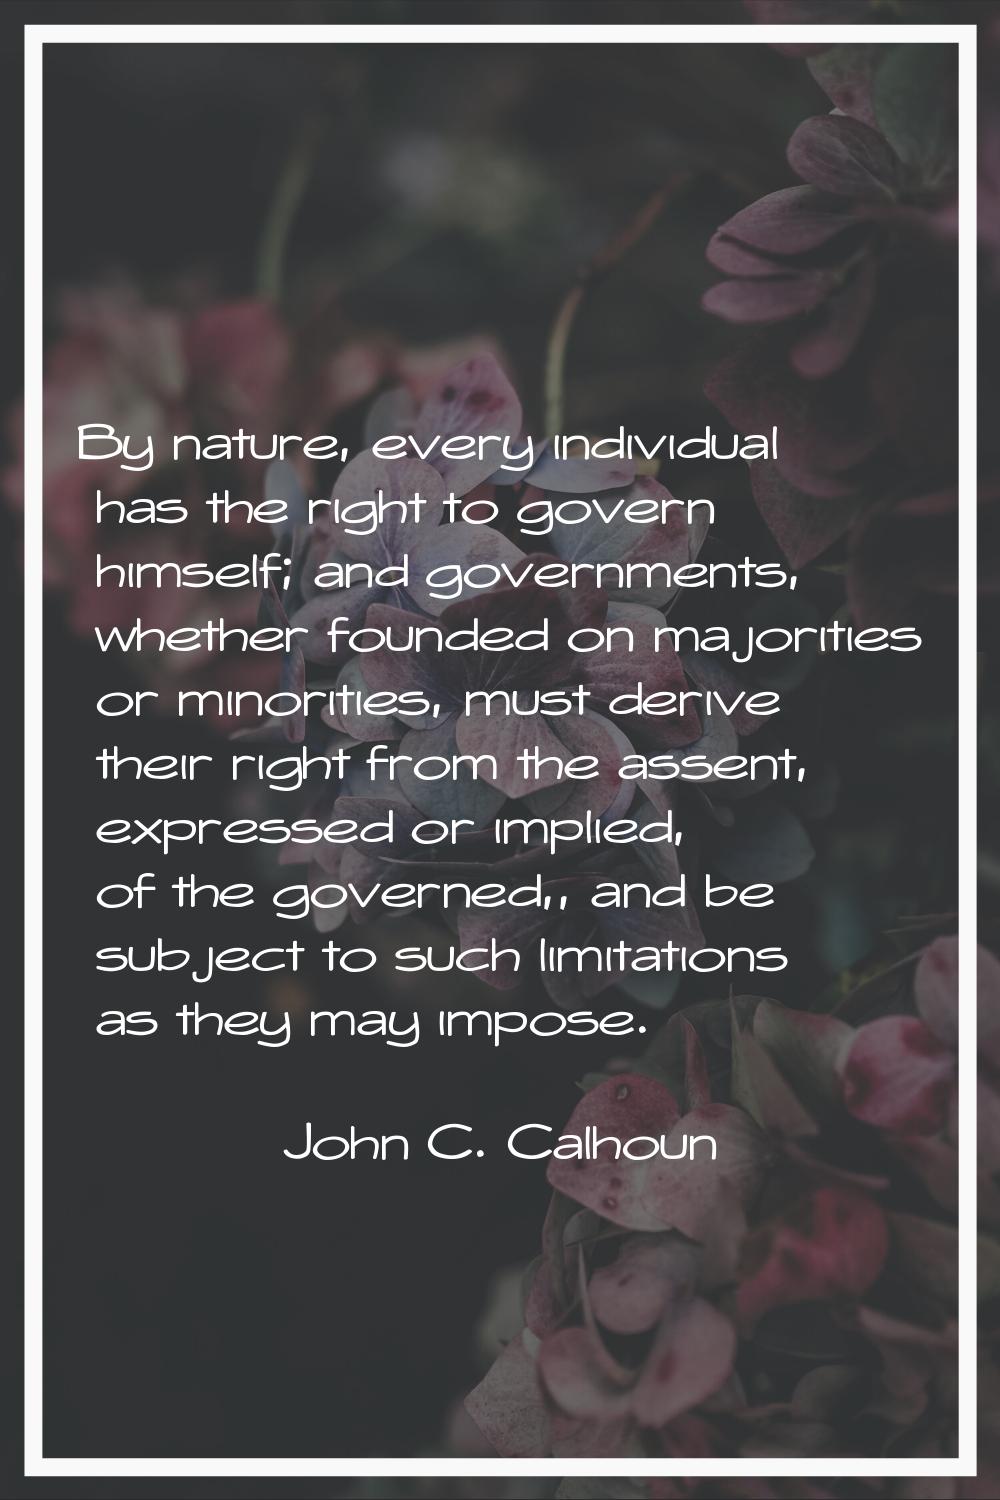 By nature, every individual has the right to govern himself; and governments, whether founded on ma